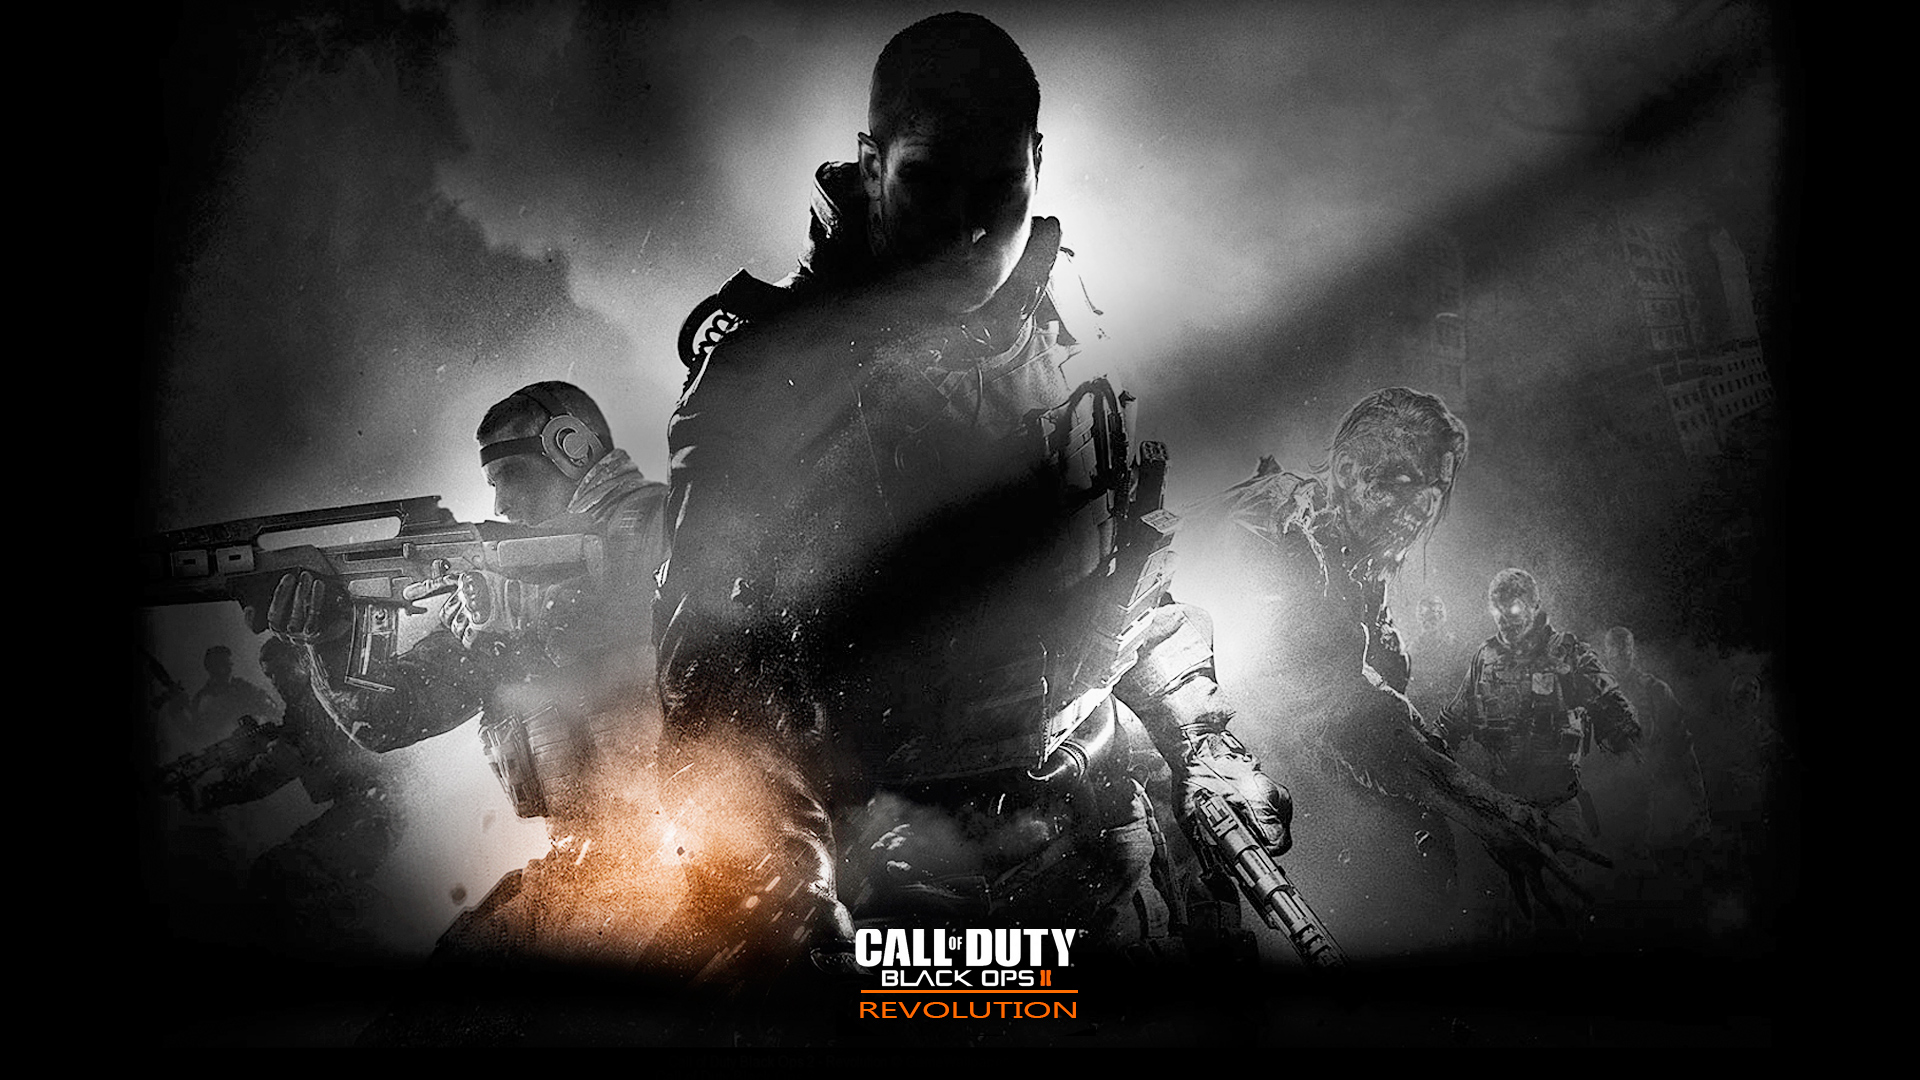 Call Of Duty Black Ops Call Of Duty Black Ops Ii Video Games Dark Weapon Soldier Call Of Duty 1920x1080